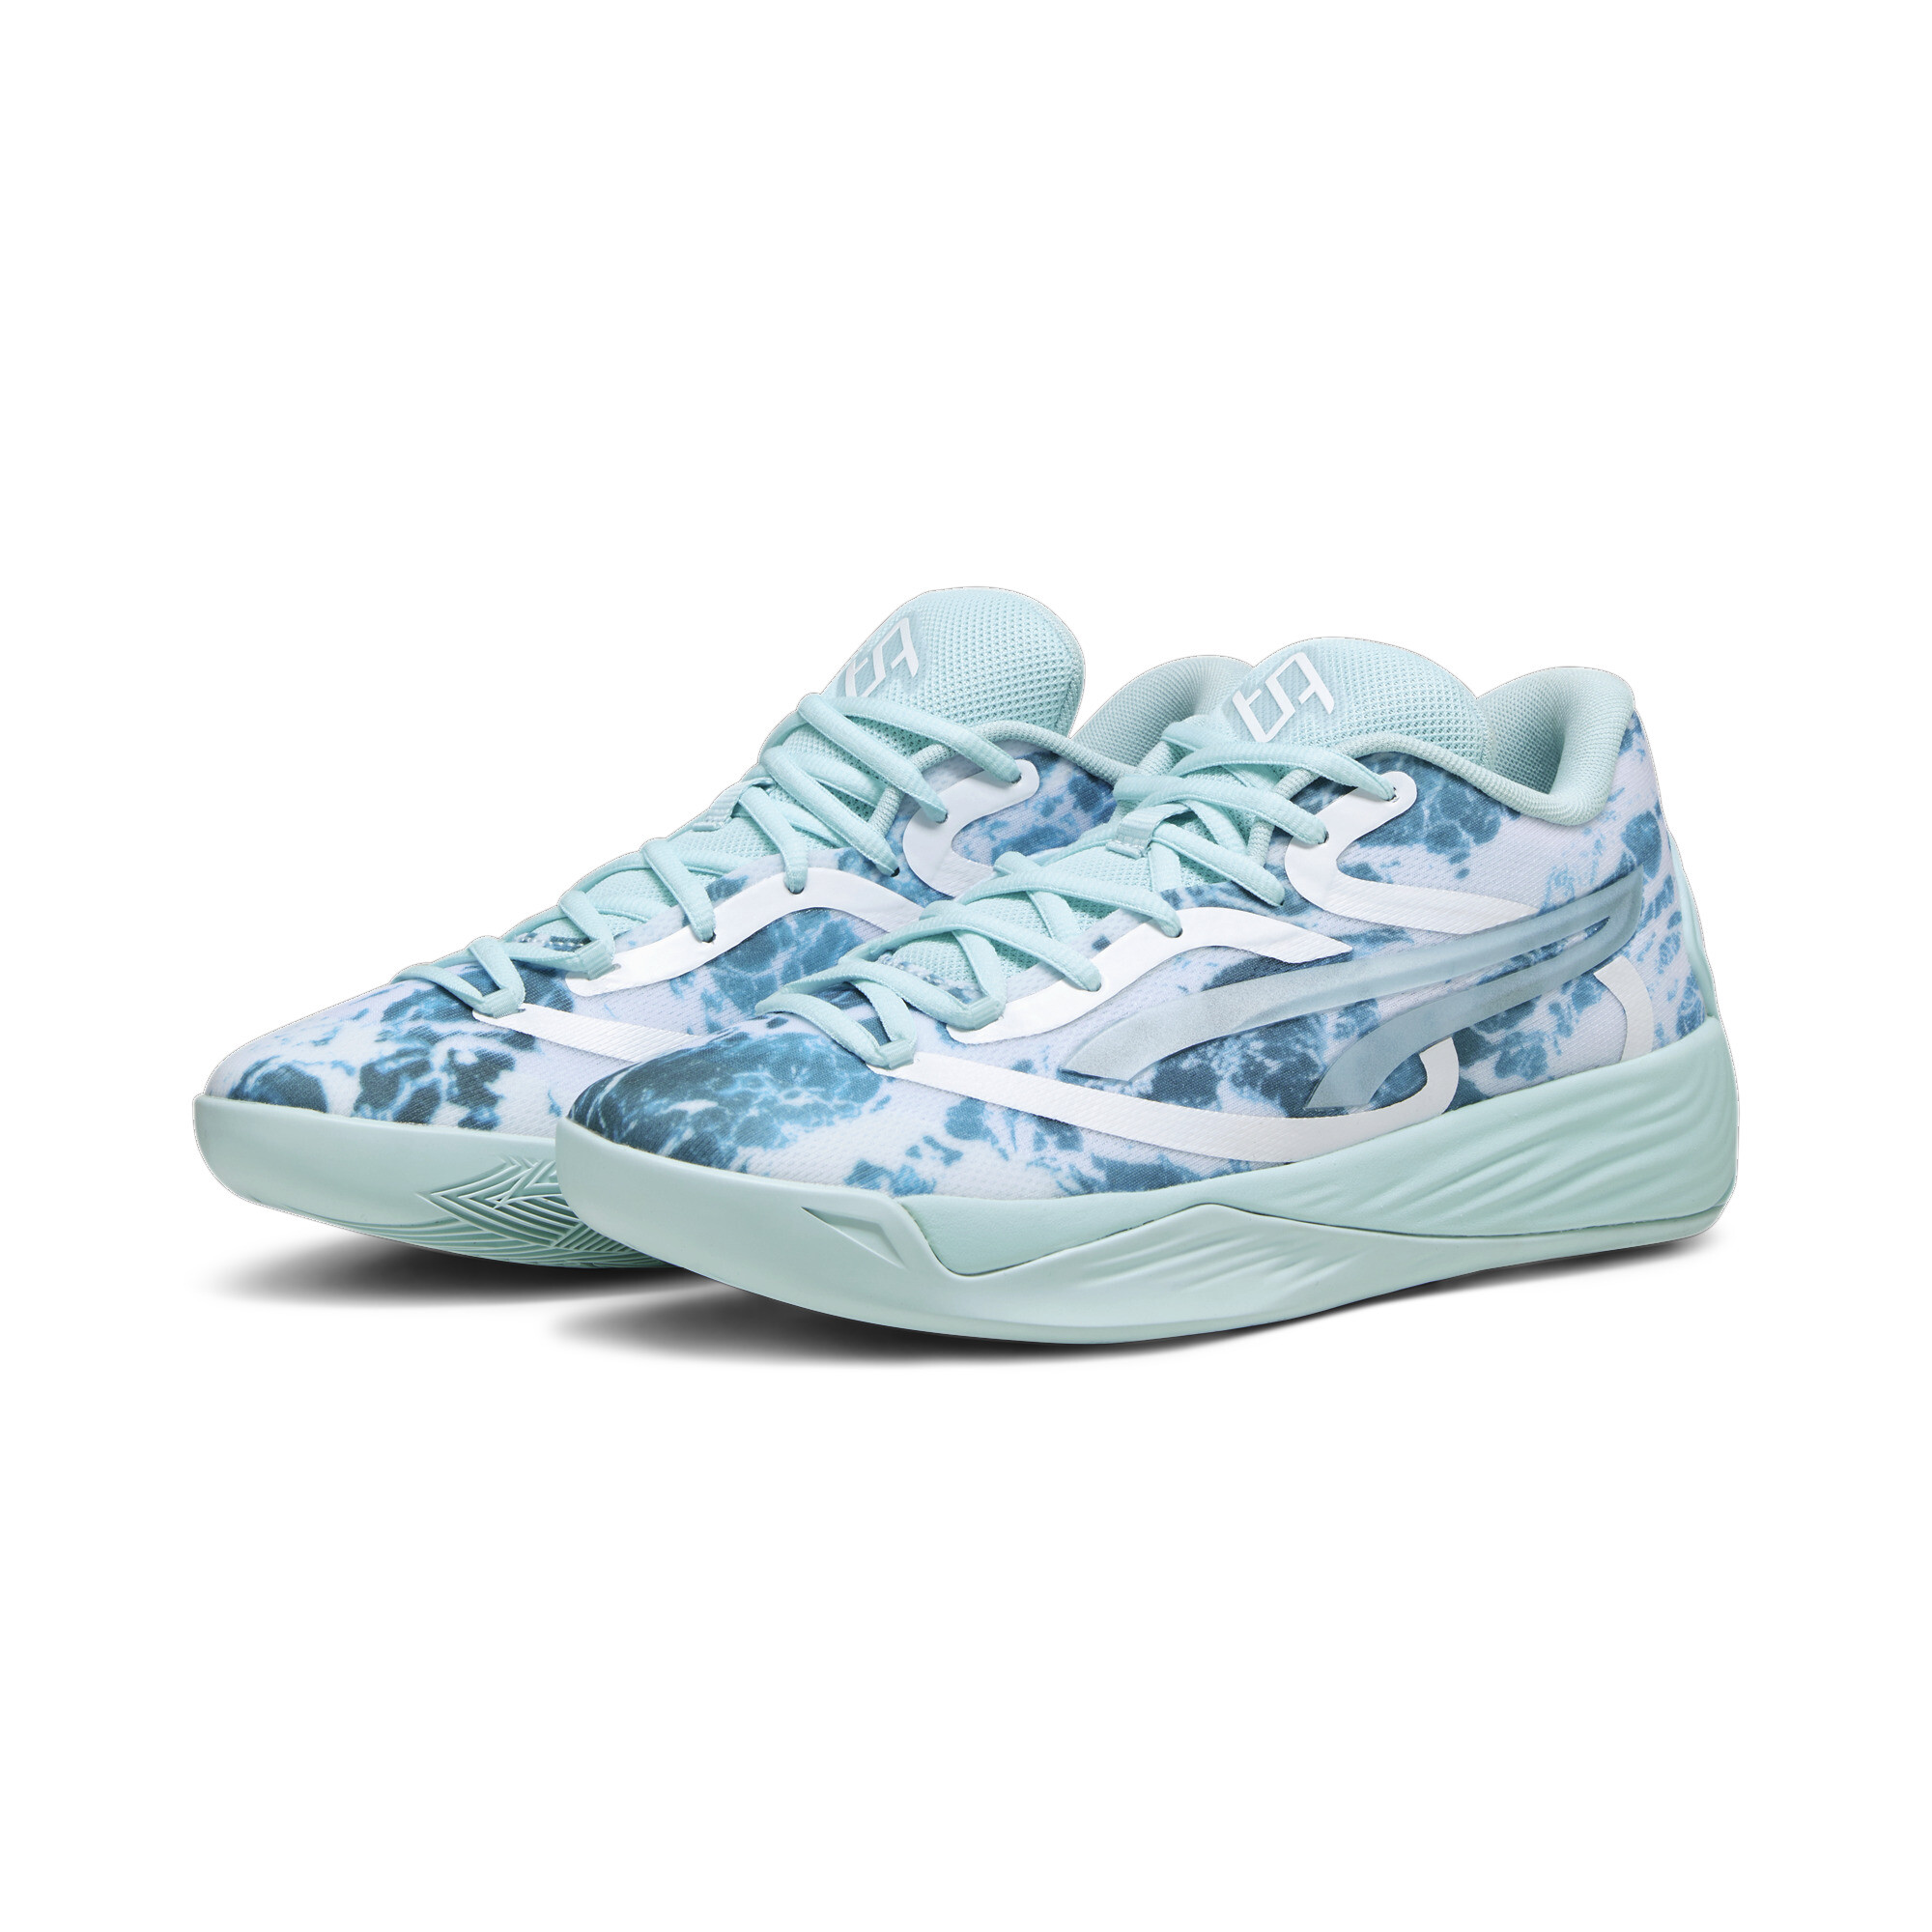 Women's Puma Stewie 2 Water's Basketball Shoes, Blue, Size 45, Shoes